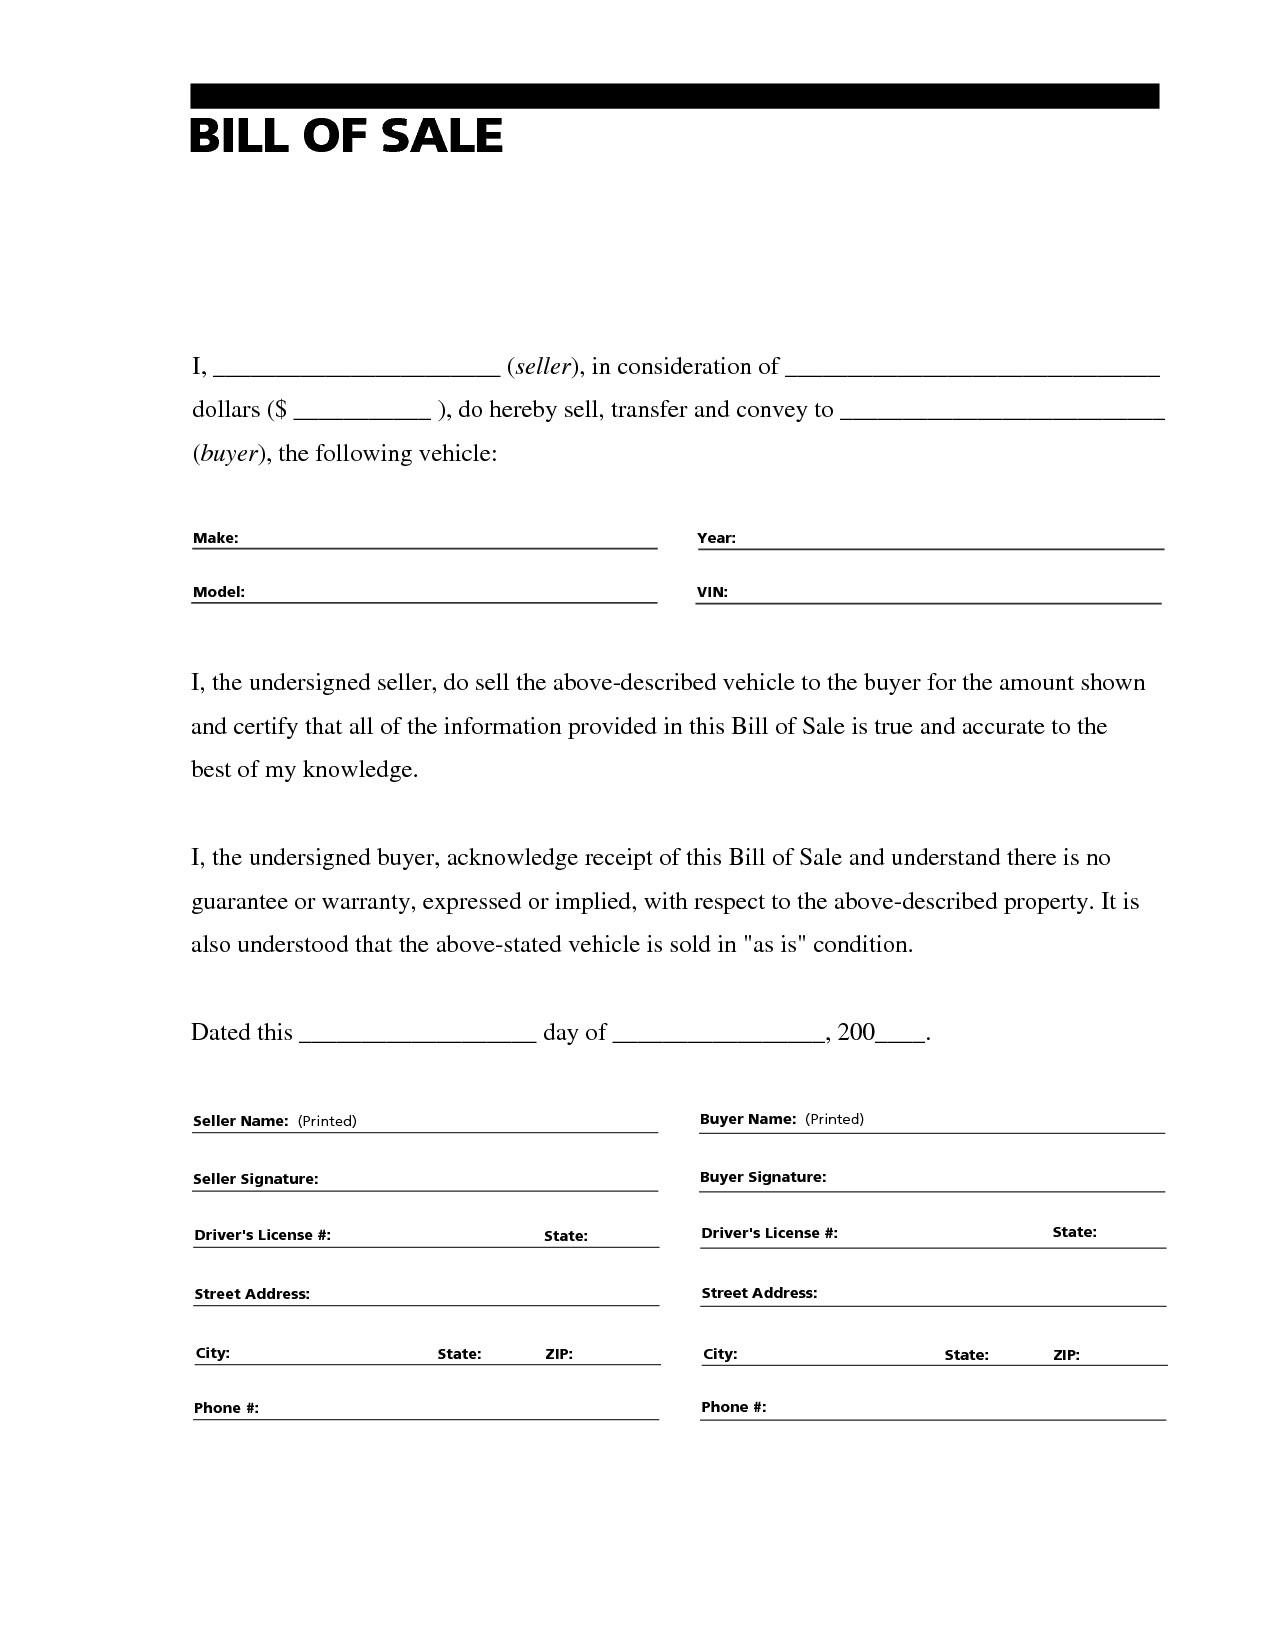 Free Printable Last Will And Testament Blank Forms Florida | Mbm Legal - Free Printable Last Will And Testament Blank Forms